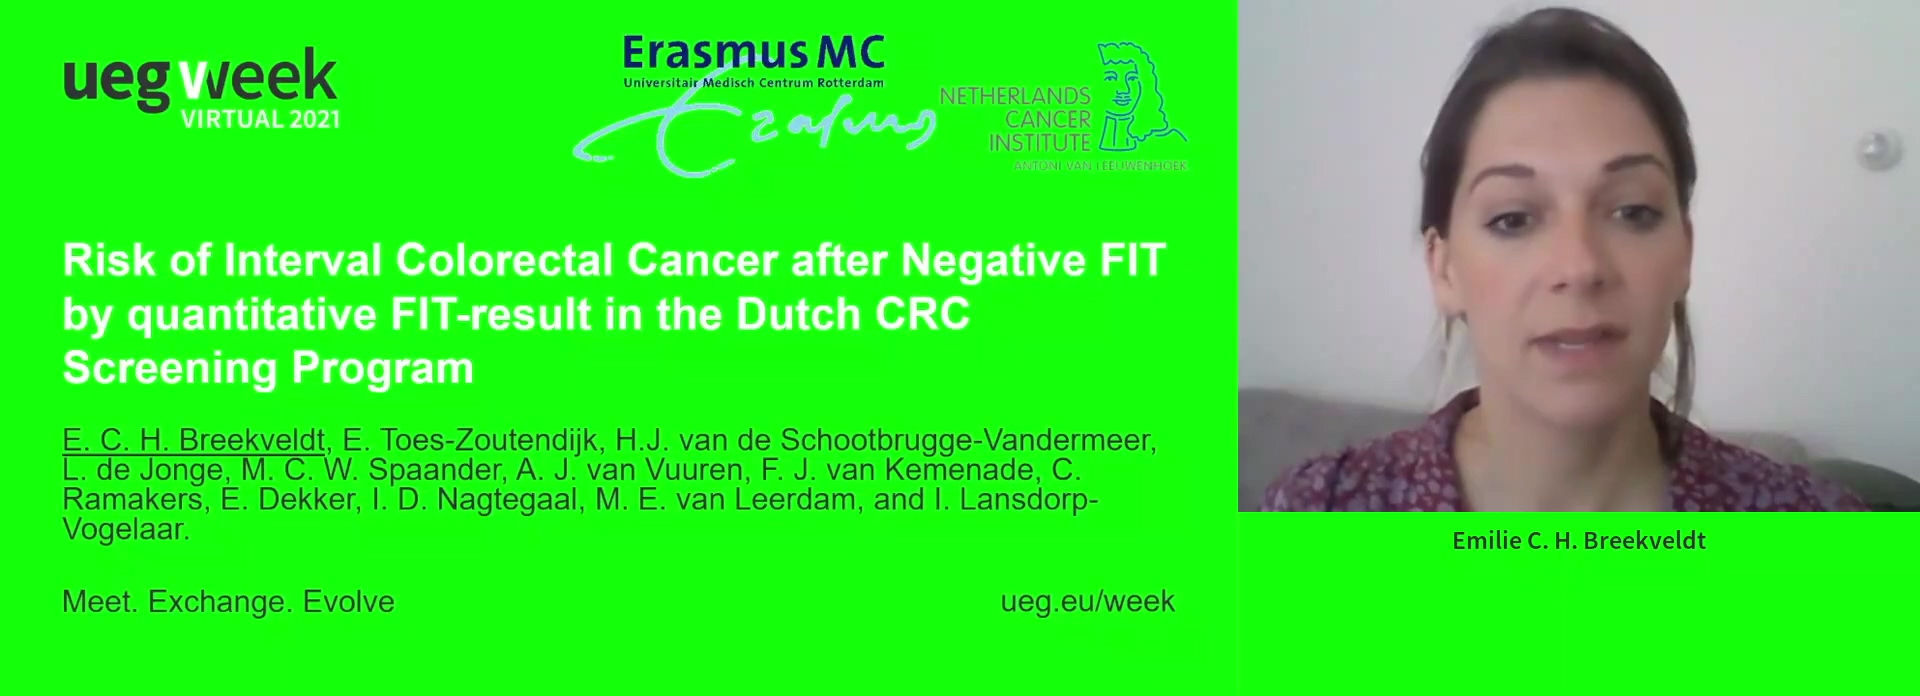 RISK OF INTERVAL COLORECTAL CANCER AFTER NEGATIVE FIT BY QUANTITATIVE FIT-RESULT IN THE DUTCH CRC SCREENING PROGRAM